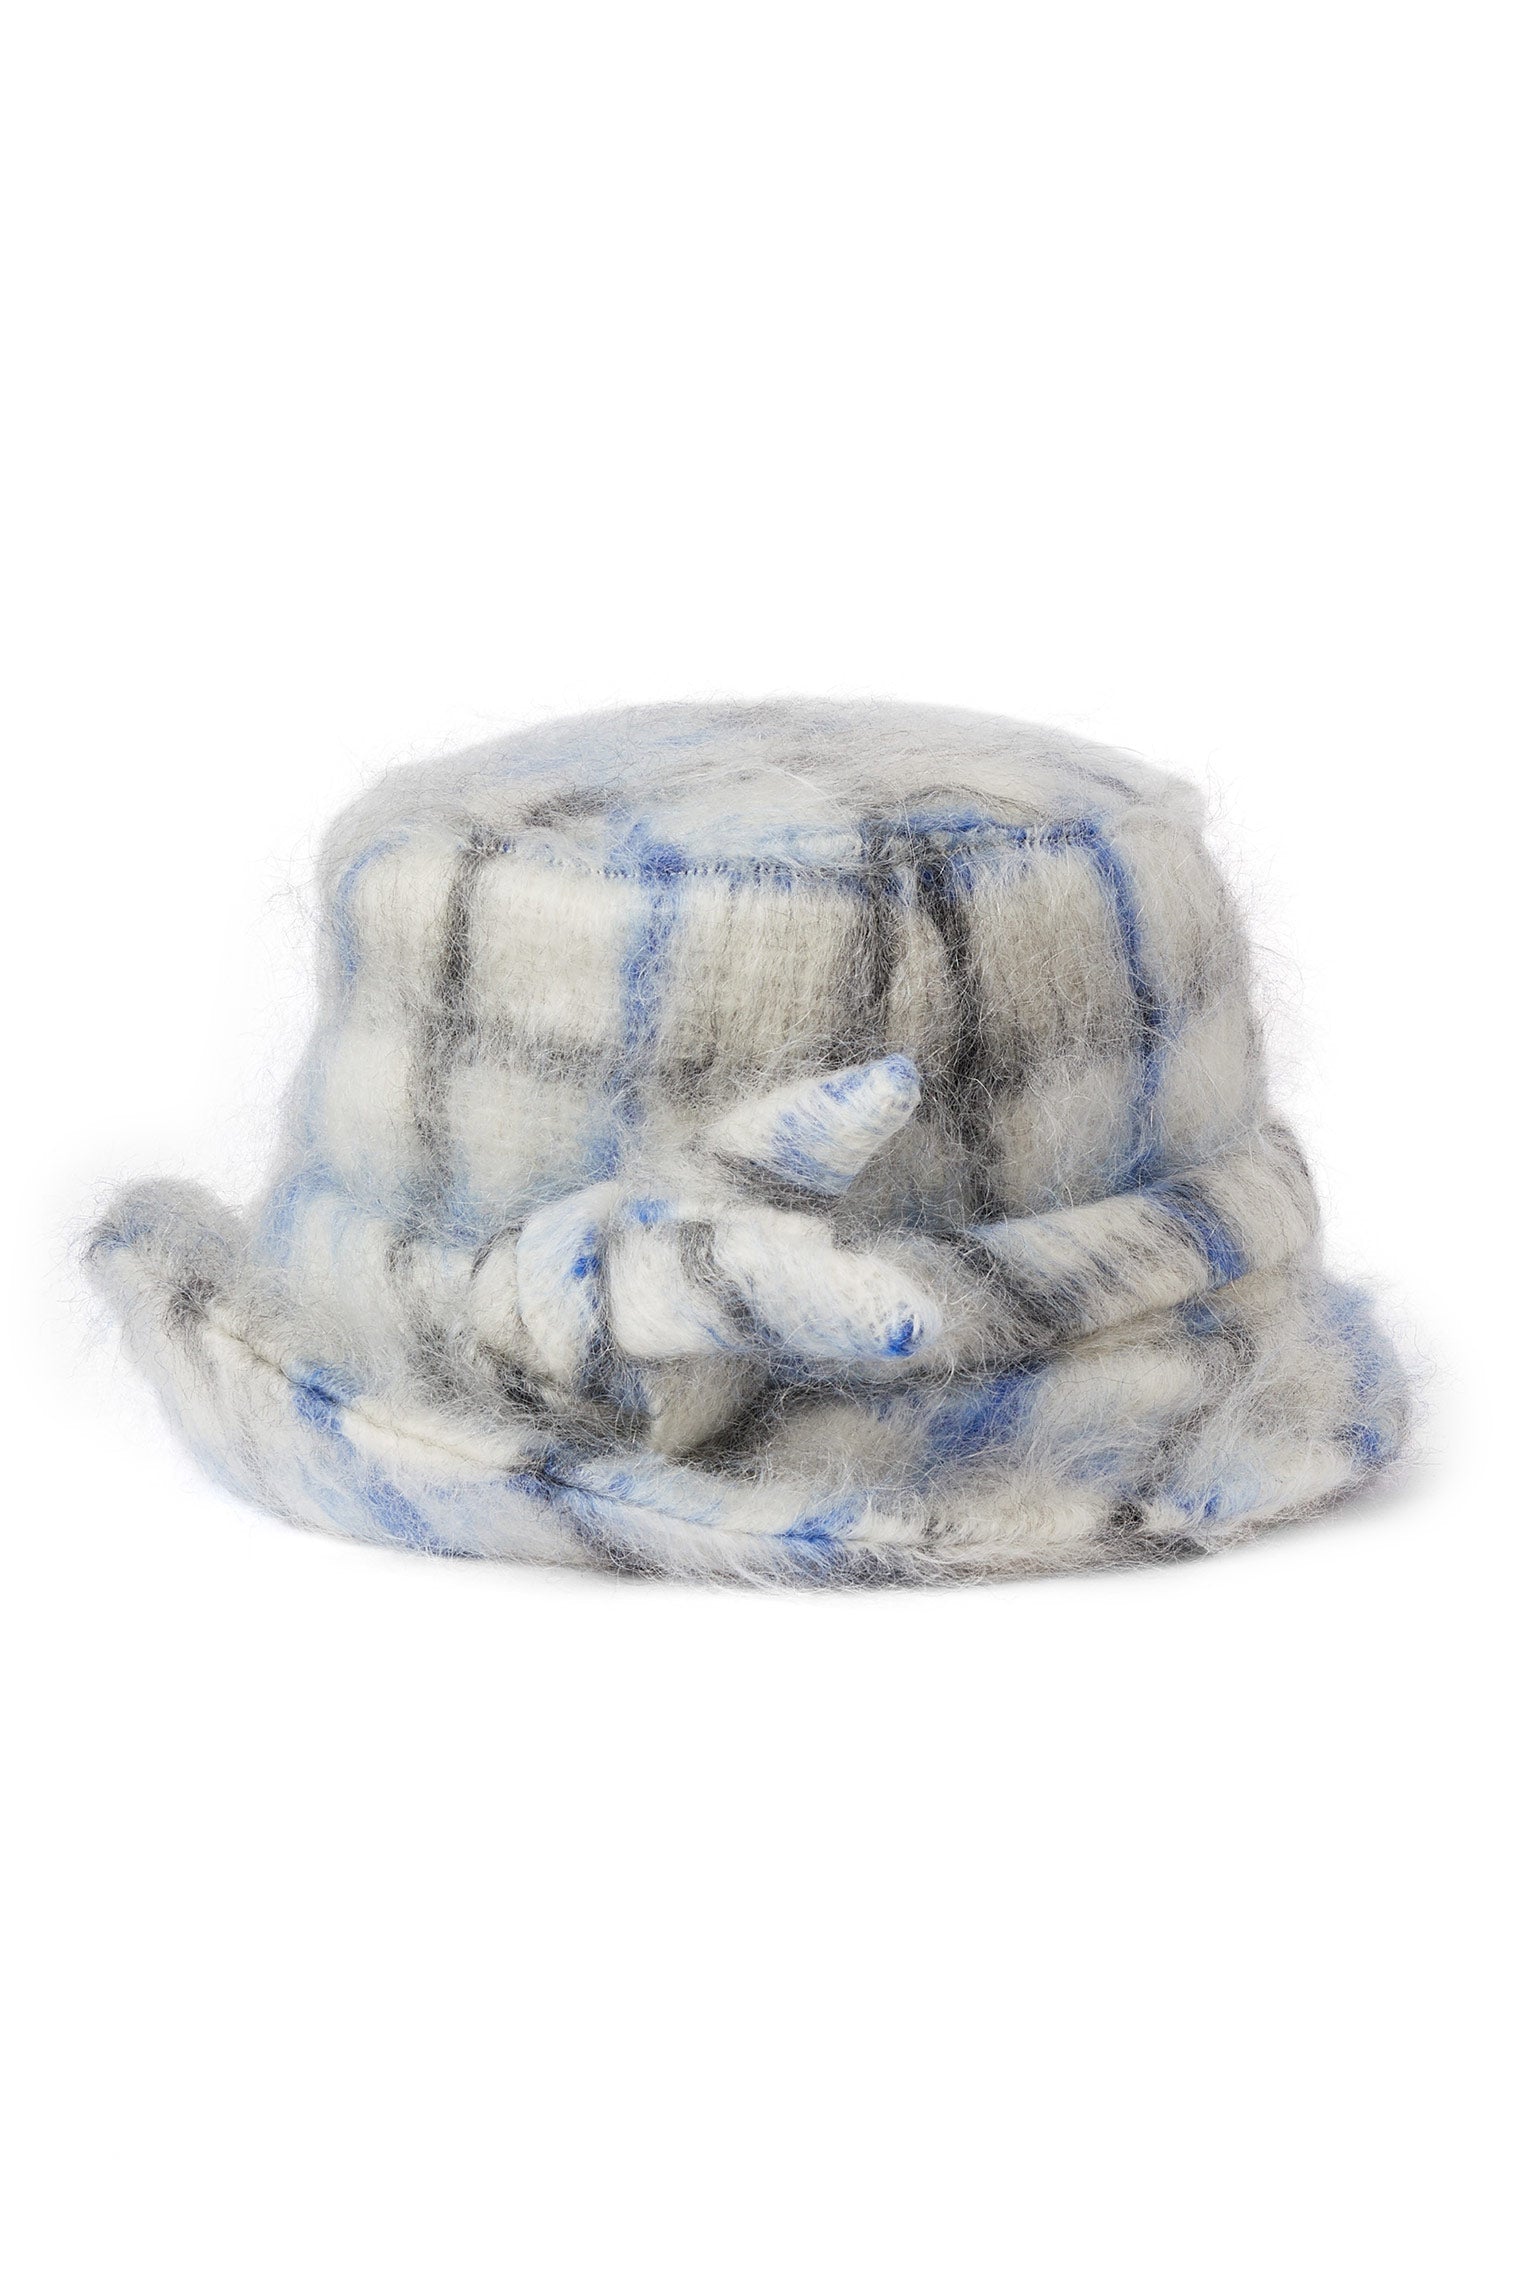 Dolores White Check Cloche - Lock Couture by Awon Golding - Lock & Co. Hatters London UK